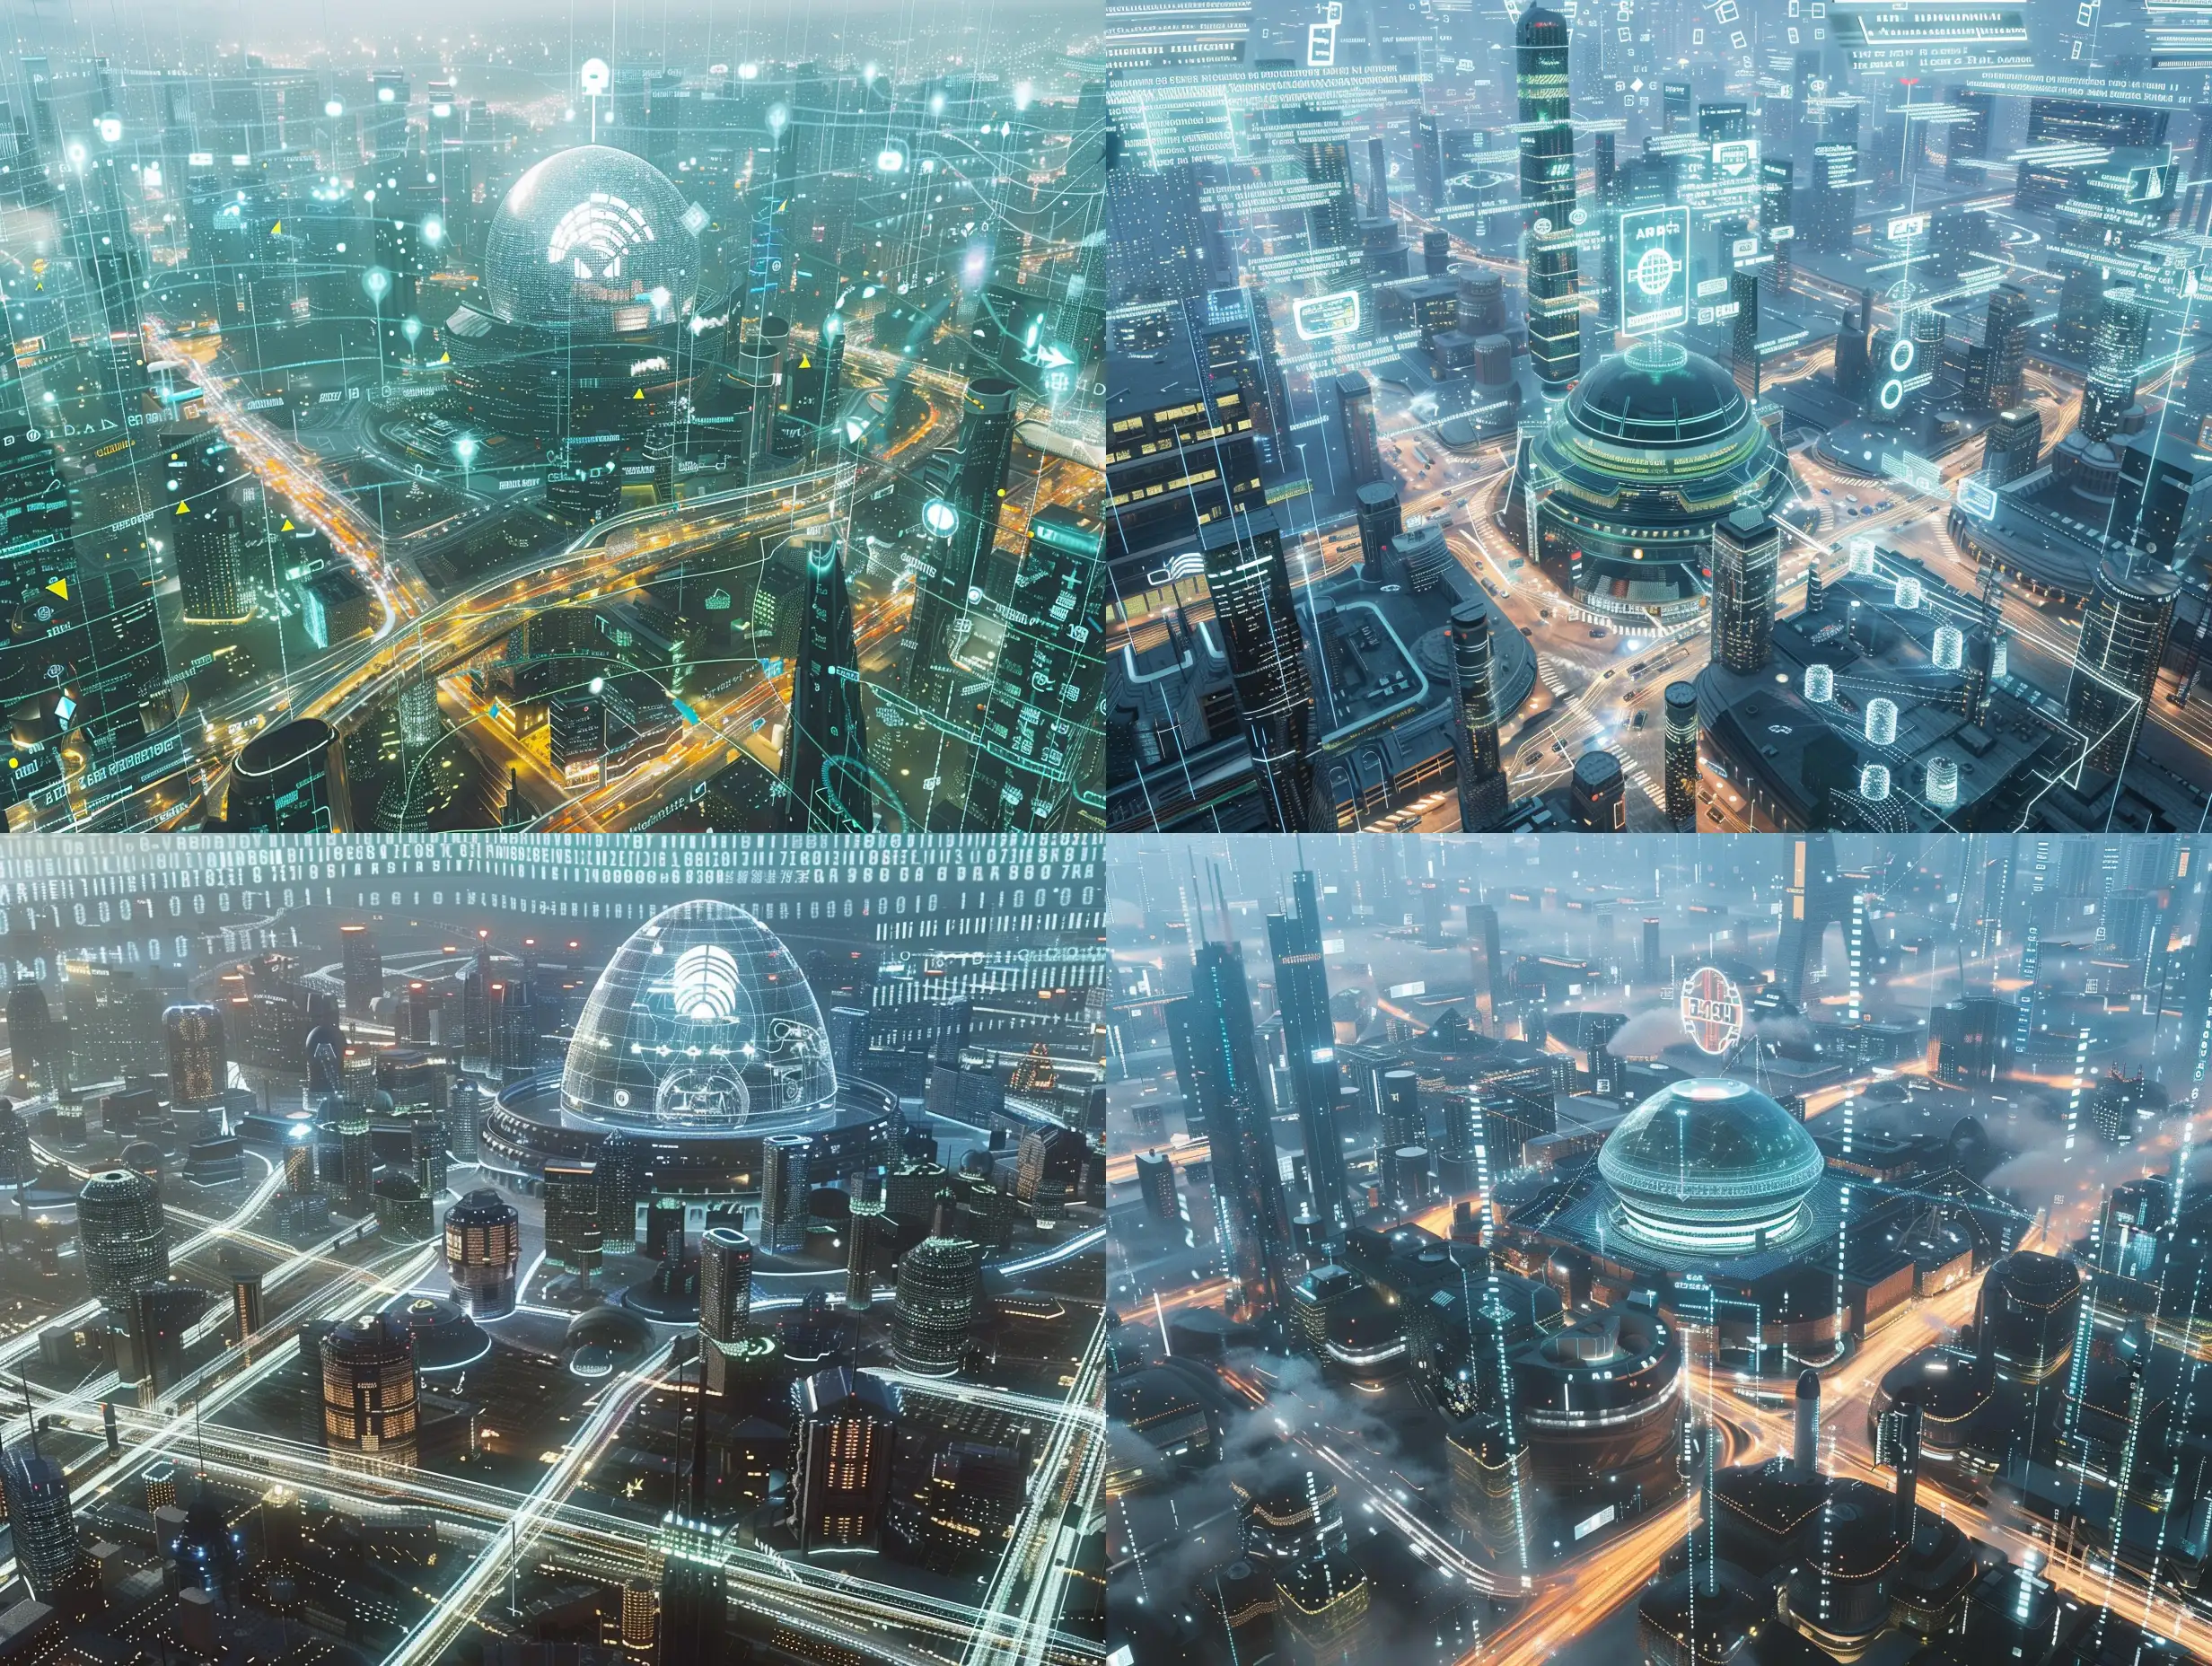 Futuristic-Cityscape-with-Giant-Holographic-Projections-Technological-Marvels-in-a-Modern-Metropolis